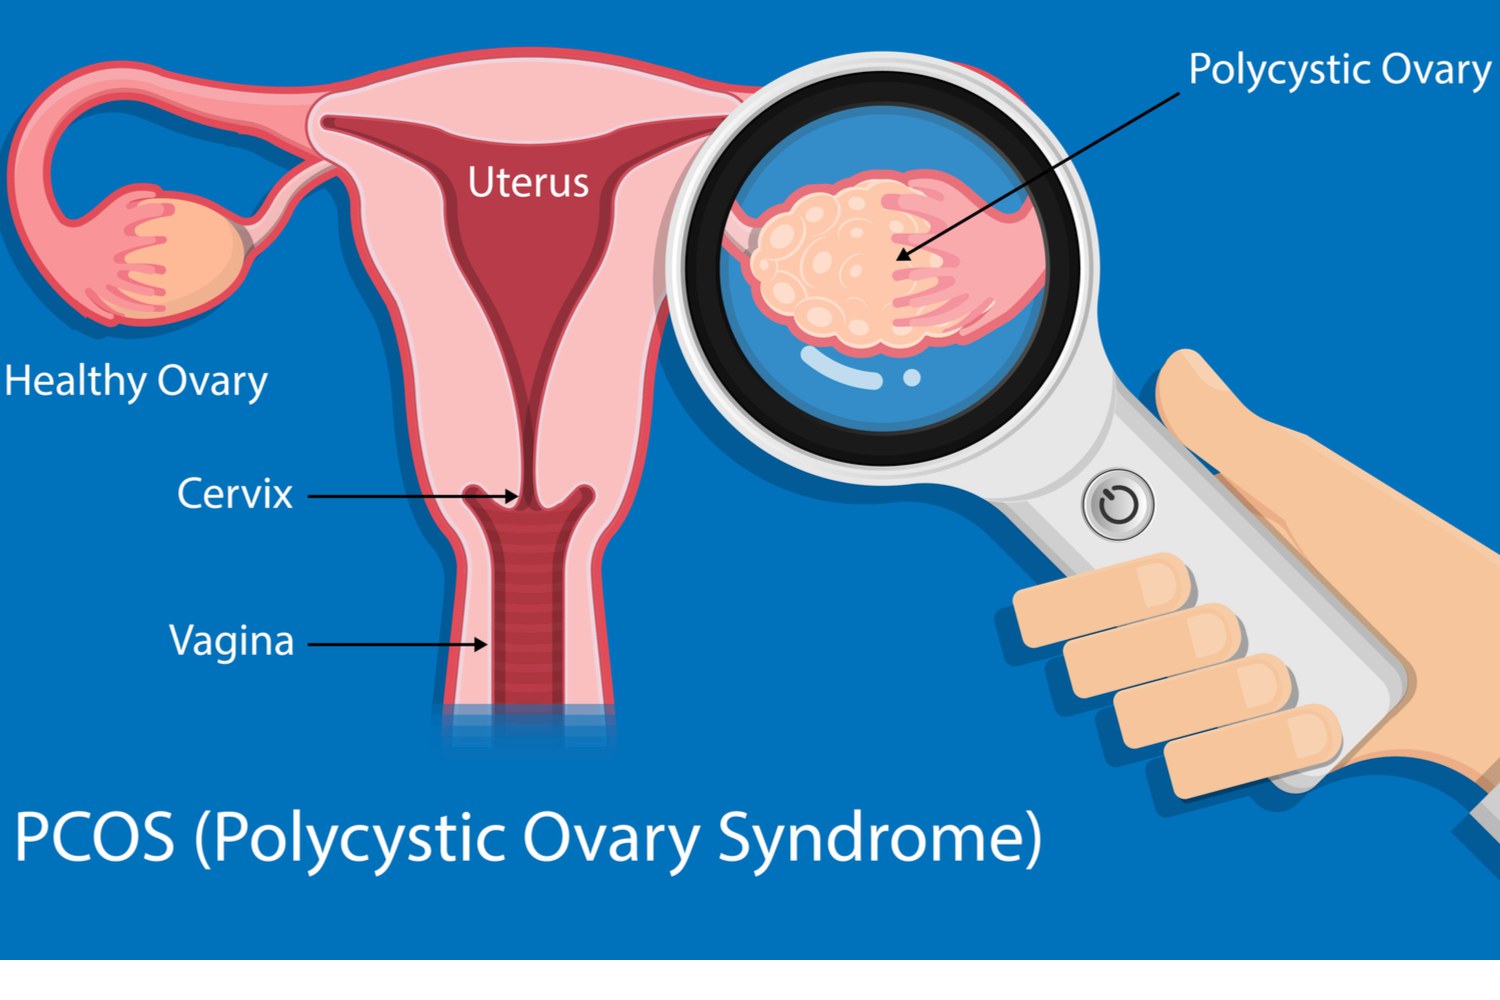 Secondary infertility and PCOS